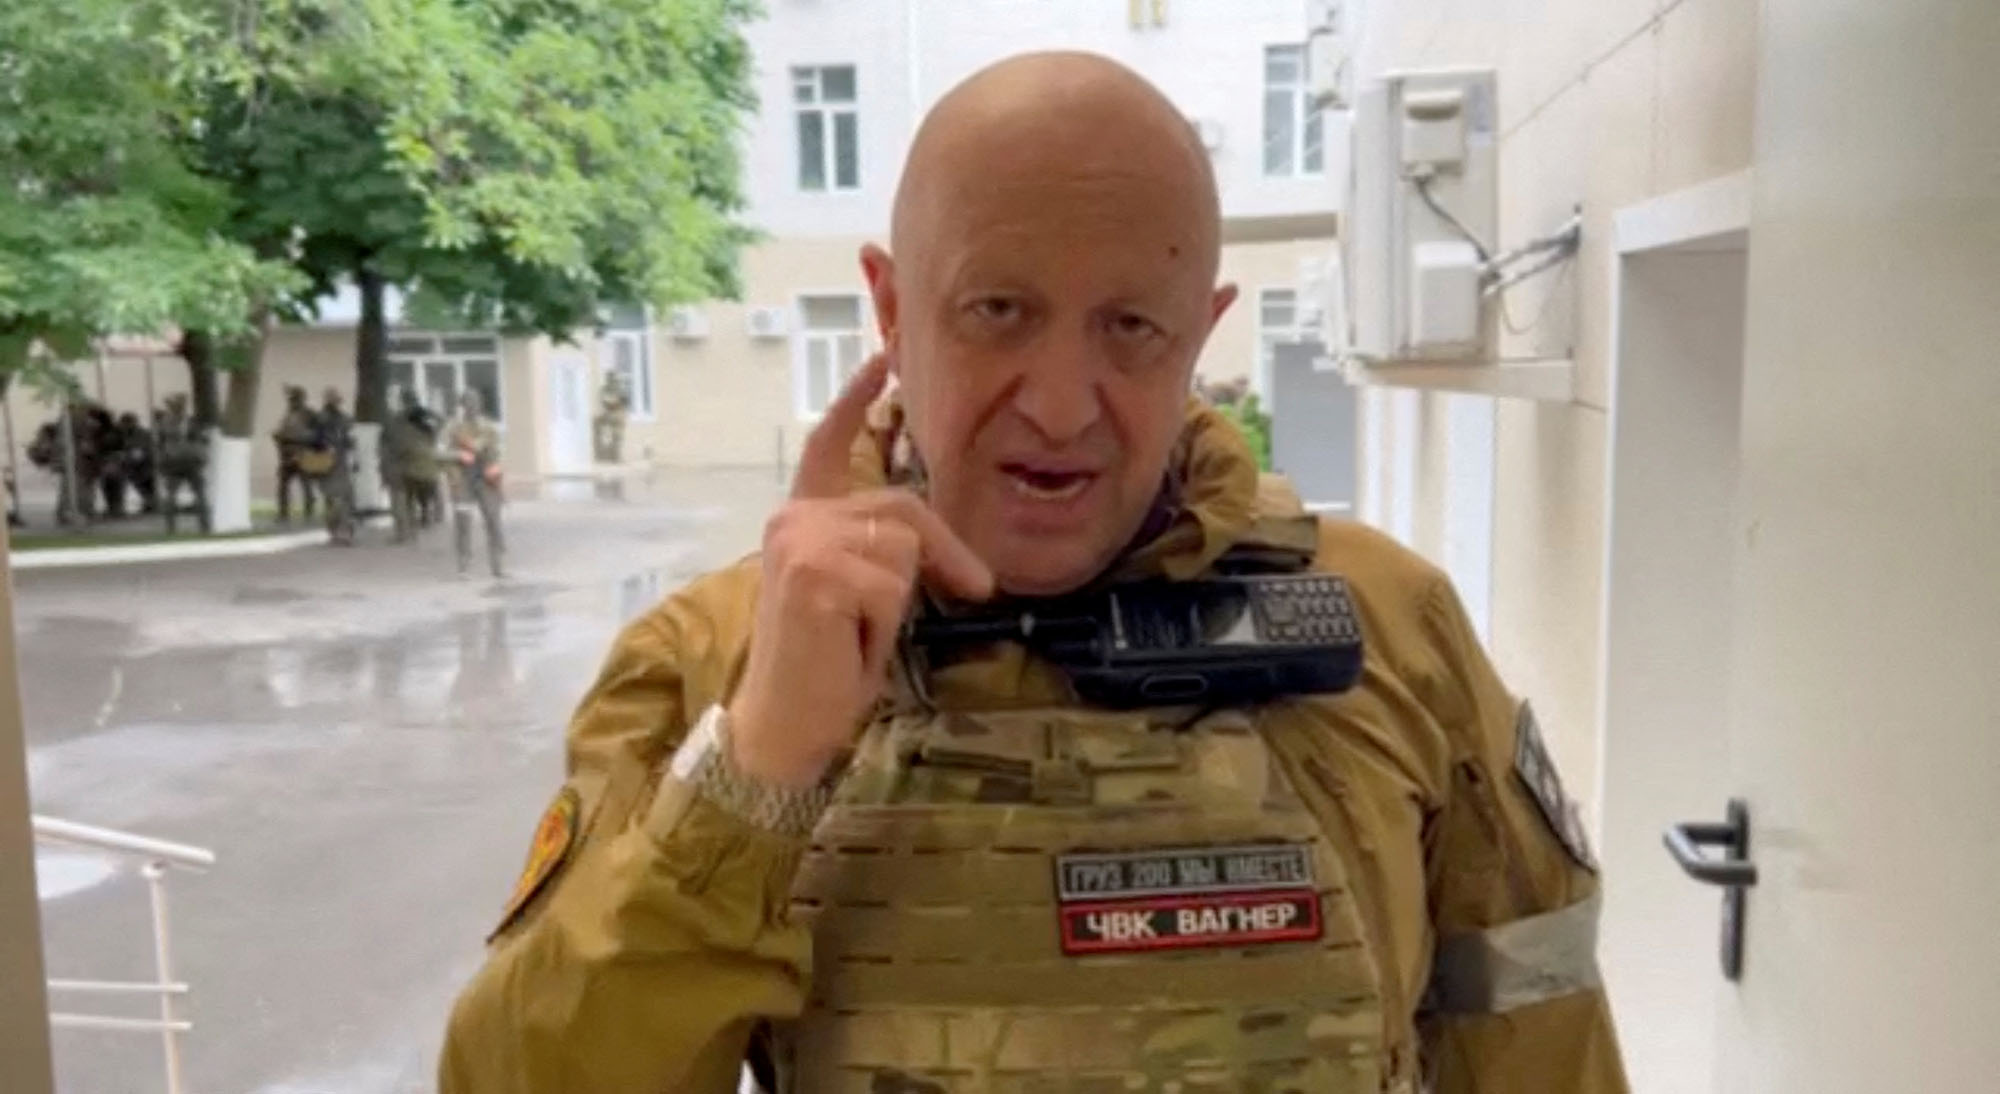 Founder of Wagner private mercenary group Yevgeny Prigozhin speaks inside the headquarters of the Russian southern army military command center in the city of Rostov-on-Don, Russia, in this still image taken from a video released on June 24.